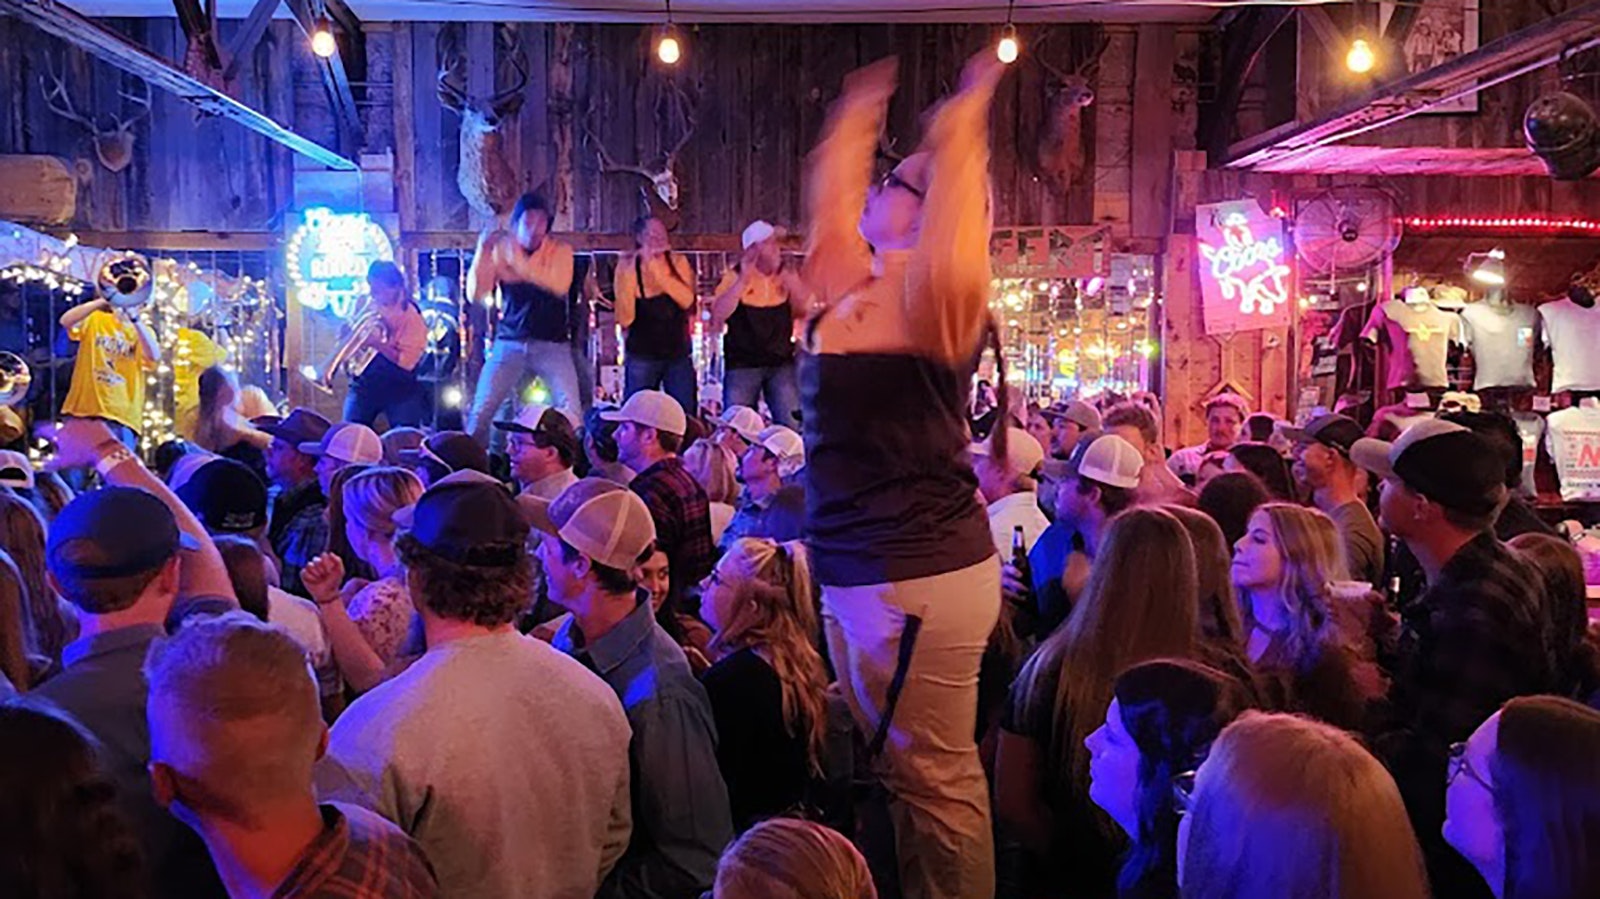 The Cowboy Saloon & Dance Hall is famous for its live music.